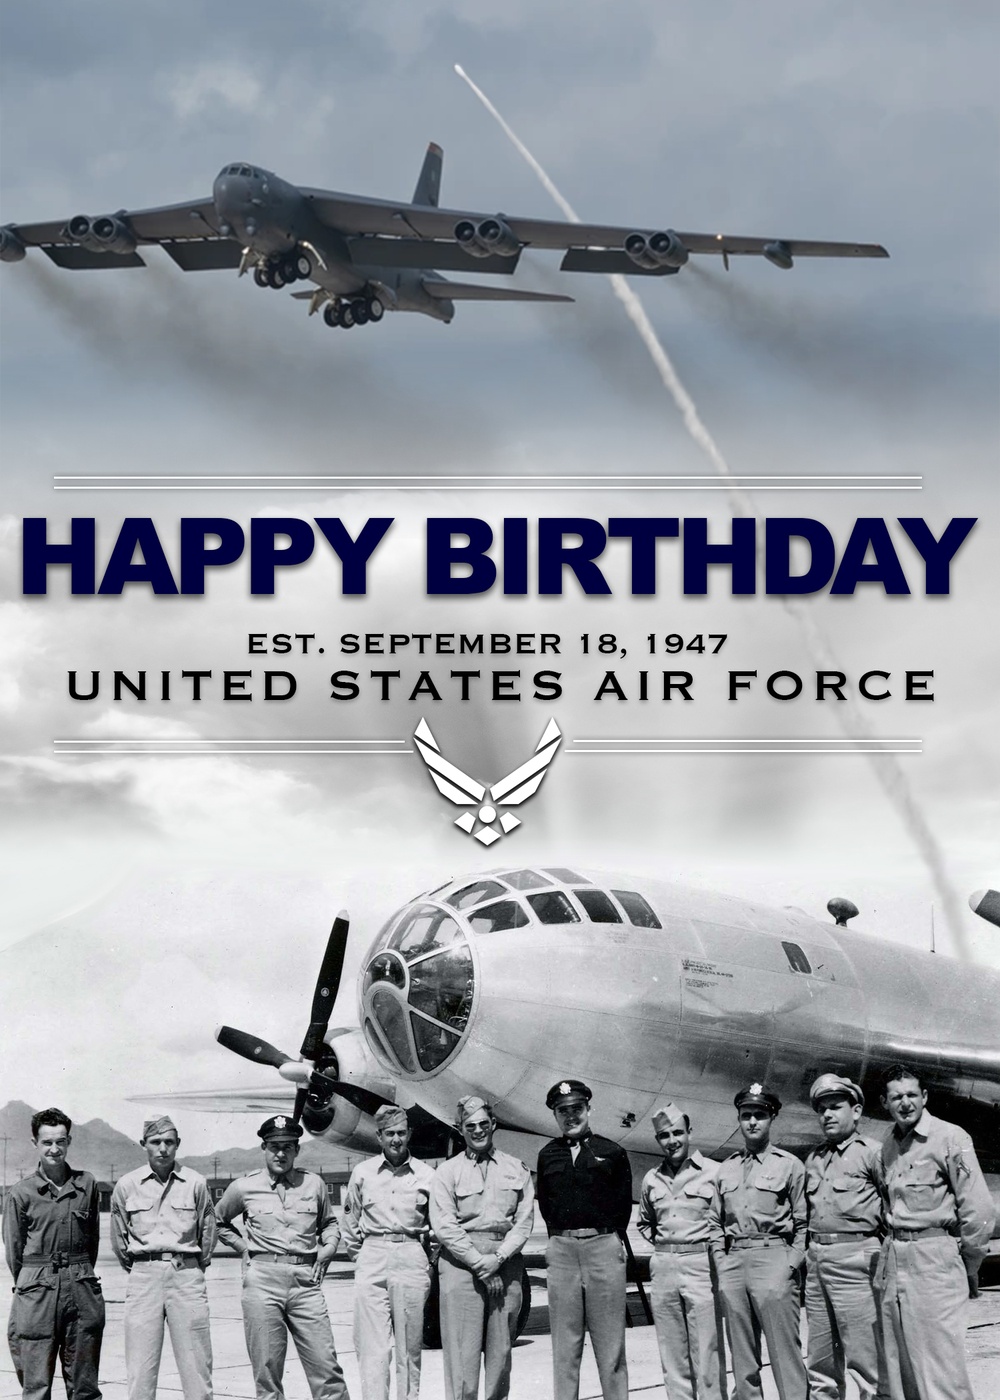 76th birthday of the United States Air Force